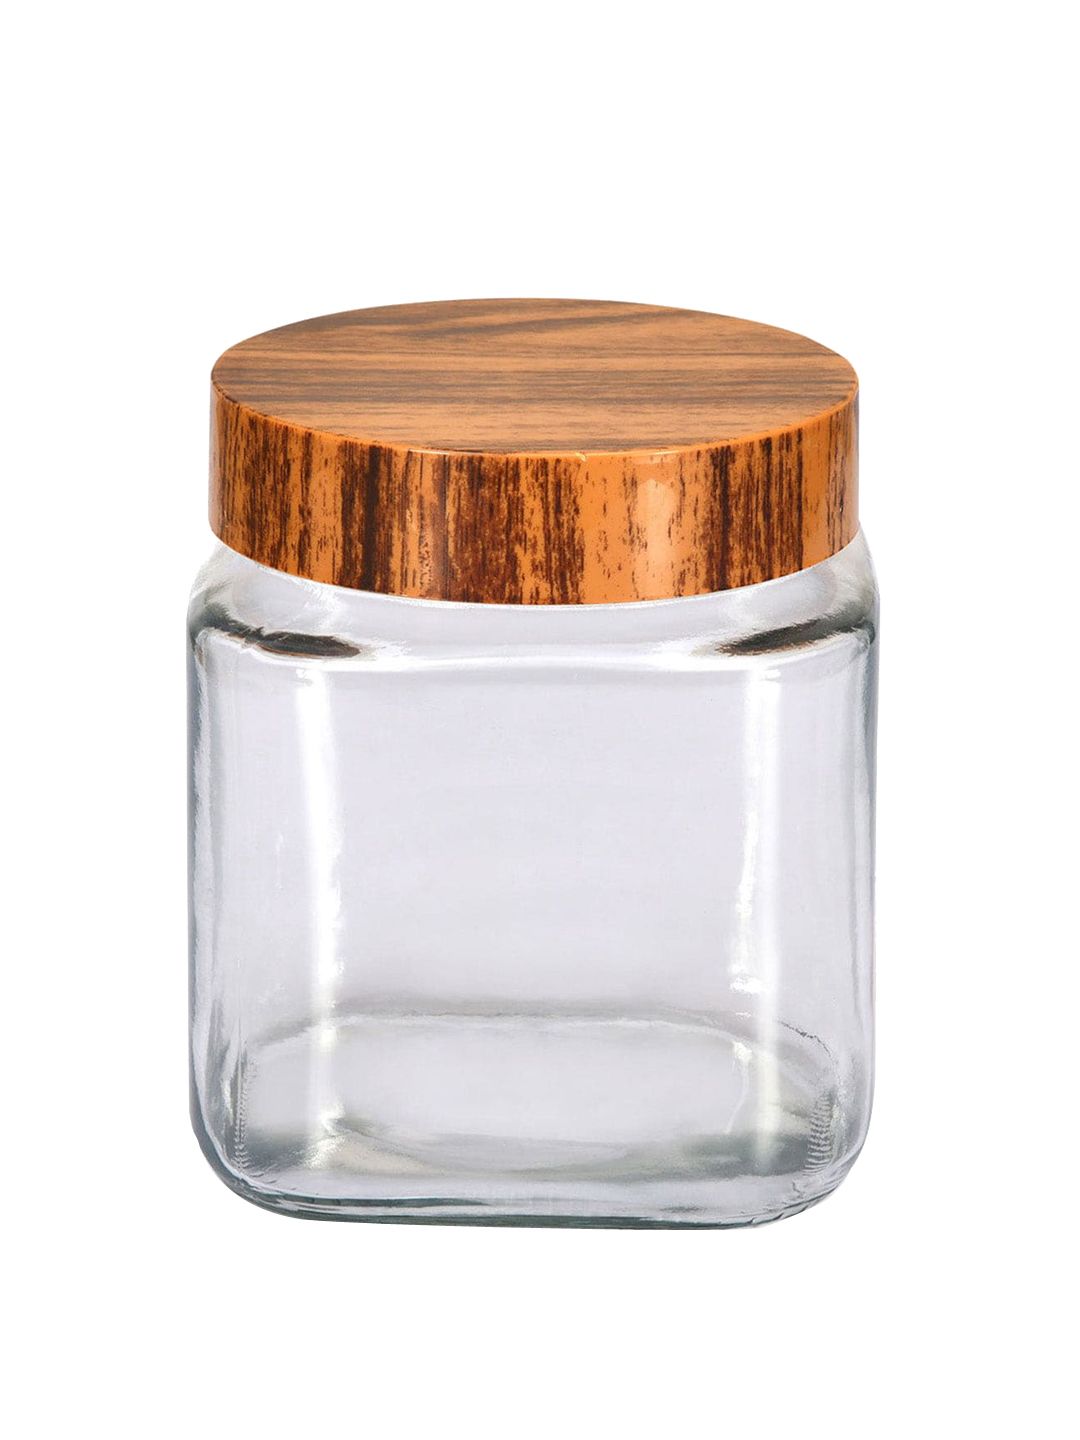 Athome by Nilkamal Transparent & Wood-Toned Glass Jar-1000ML Price in India